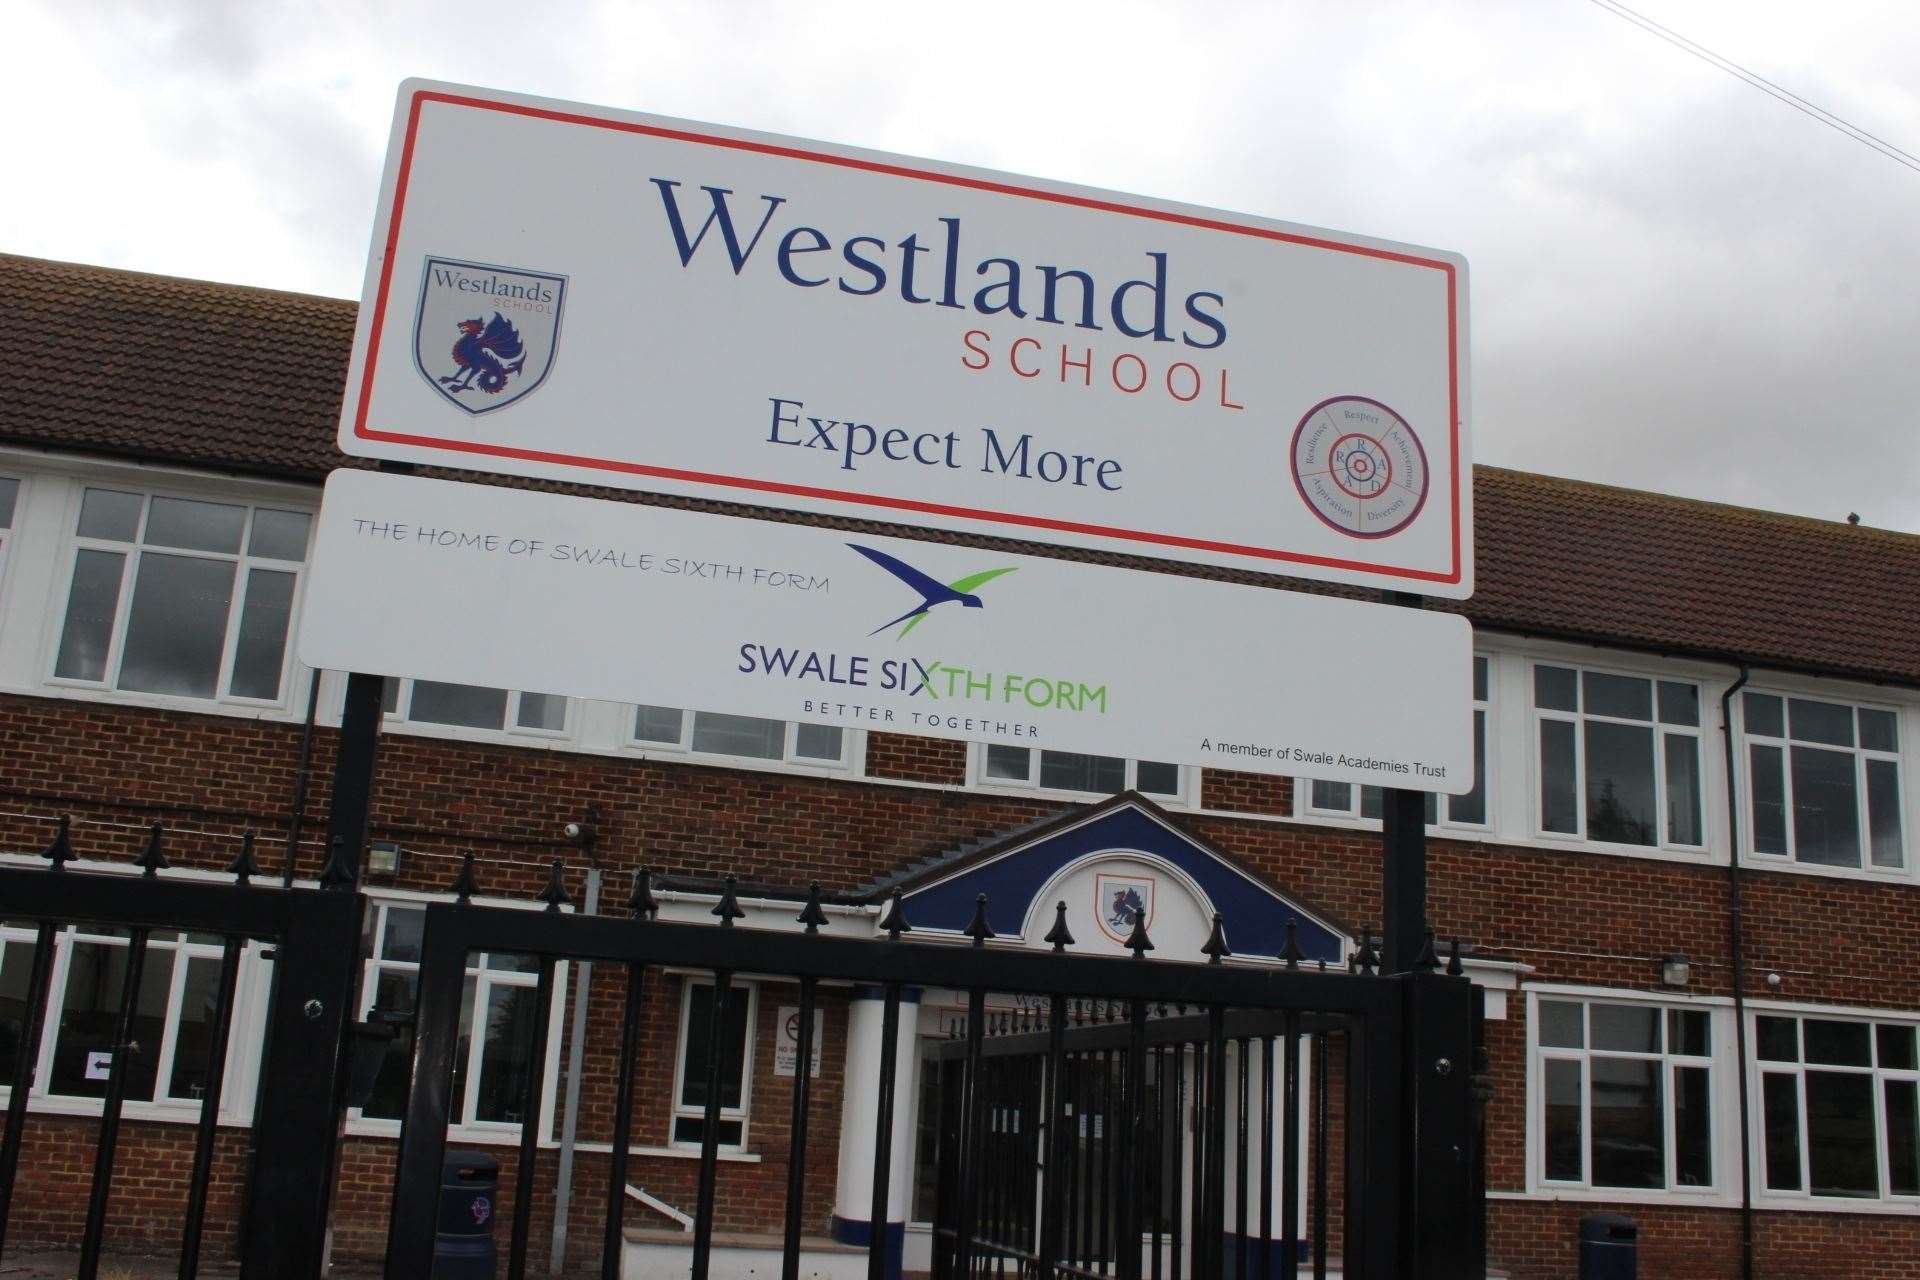 Westlands School, Sittingbourne, has had at least 19 cases of Covid-19 since children returned to school in September